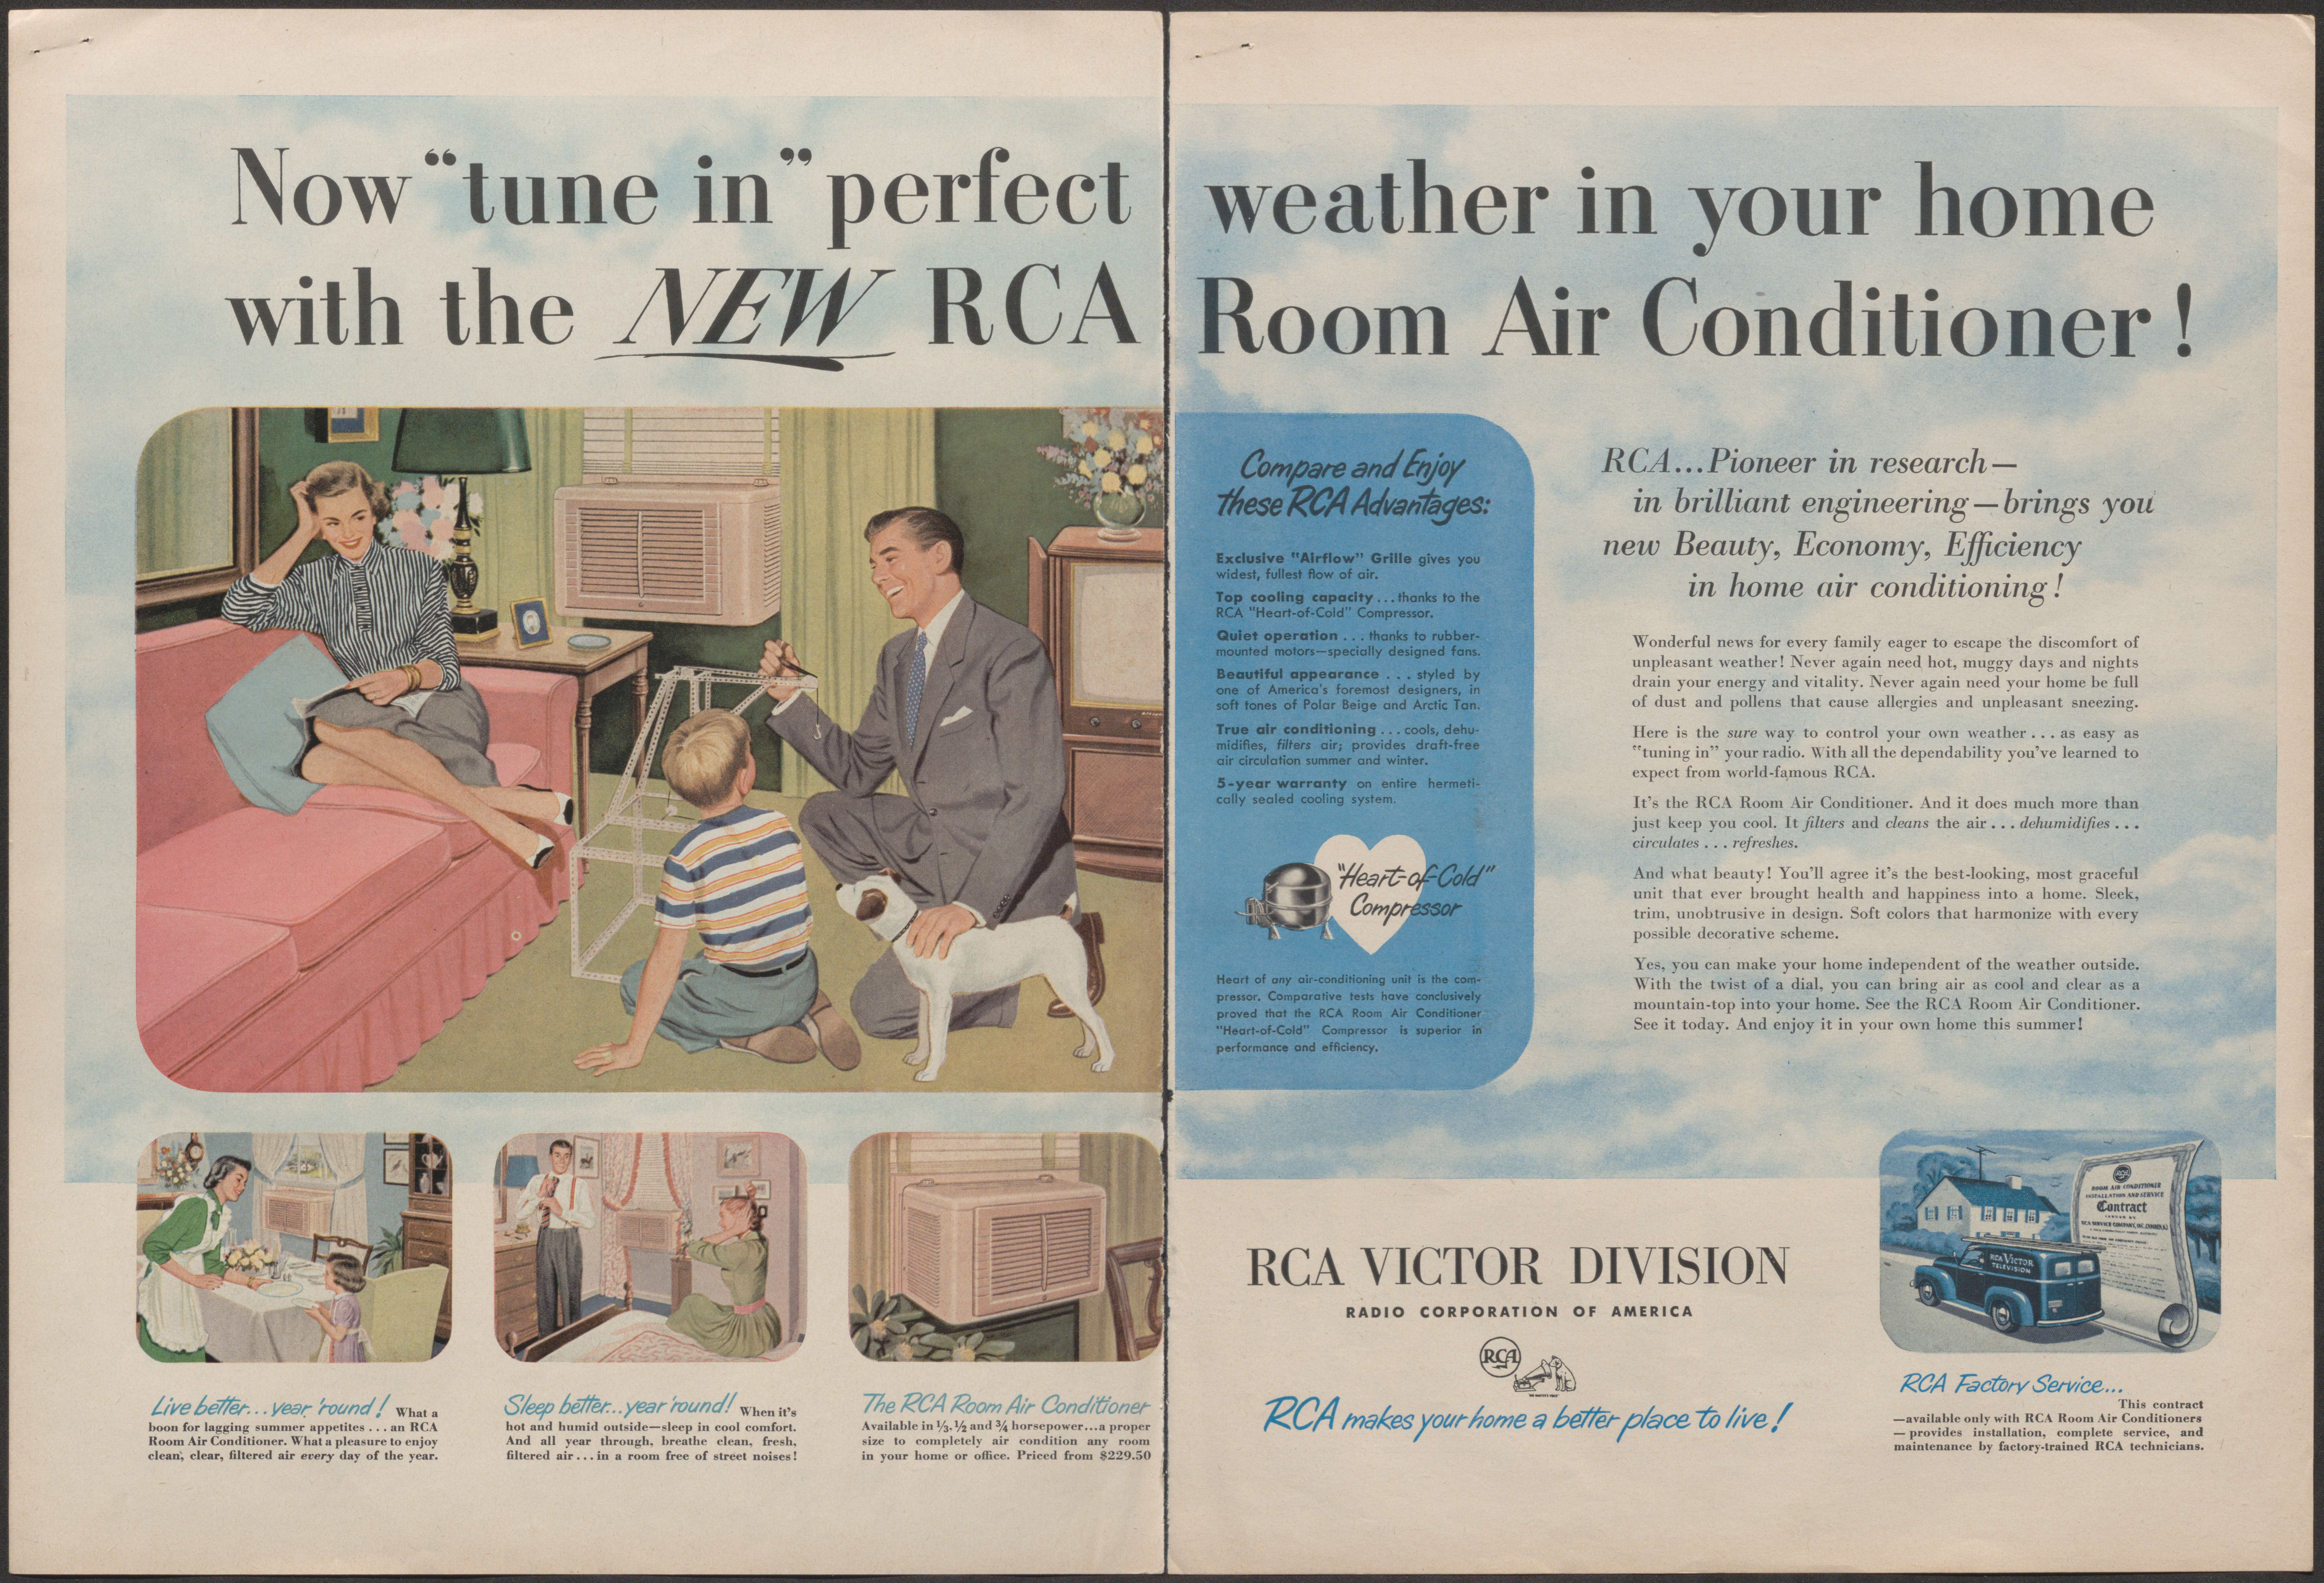 Double spread ad for RCA air conditioners with illustrations of a family in various household rooms